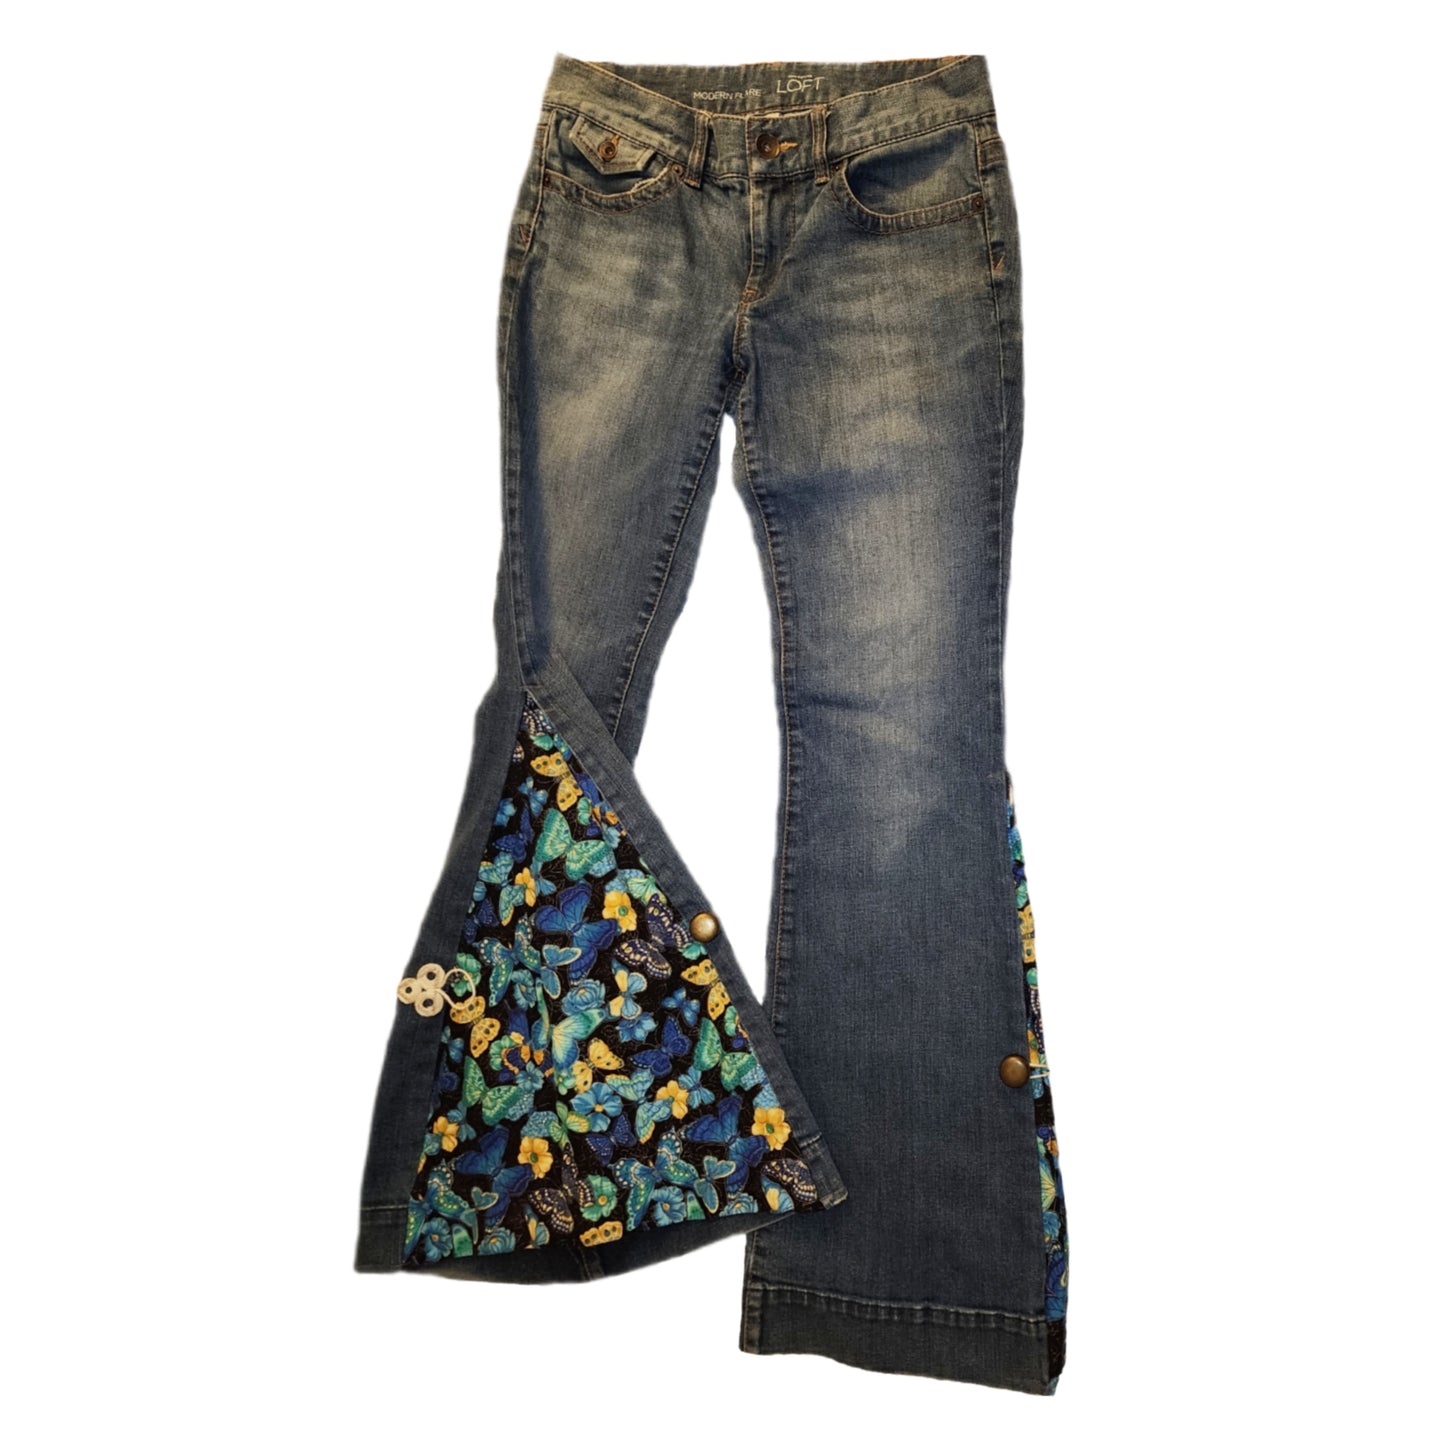 The Butterfly Jeans